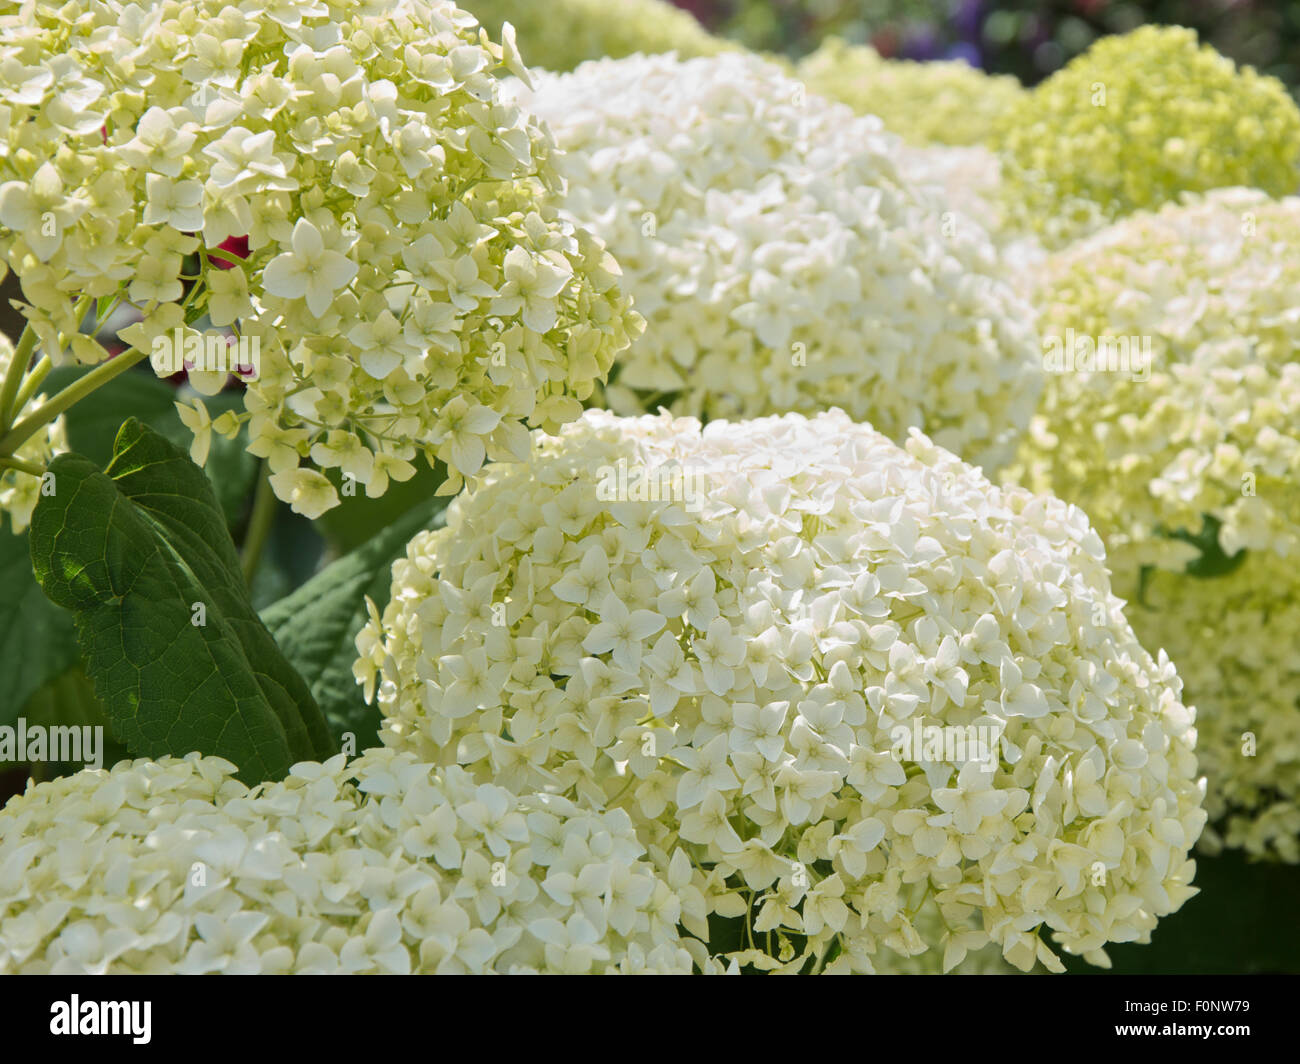 Large flowers of Hydrangea arborescens Annabelle Stock Photo